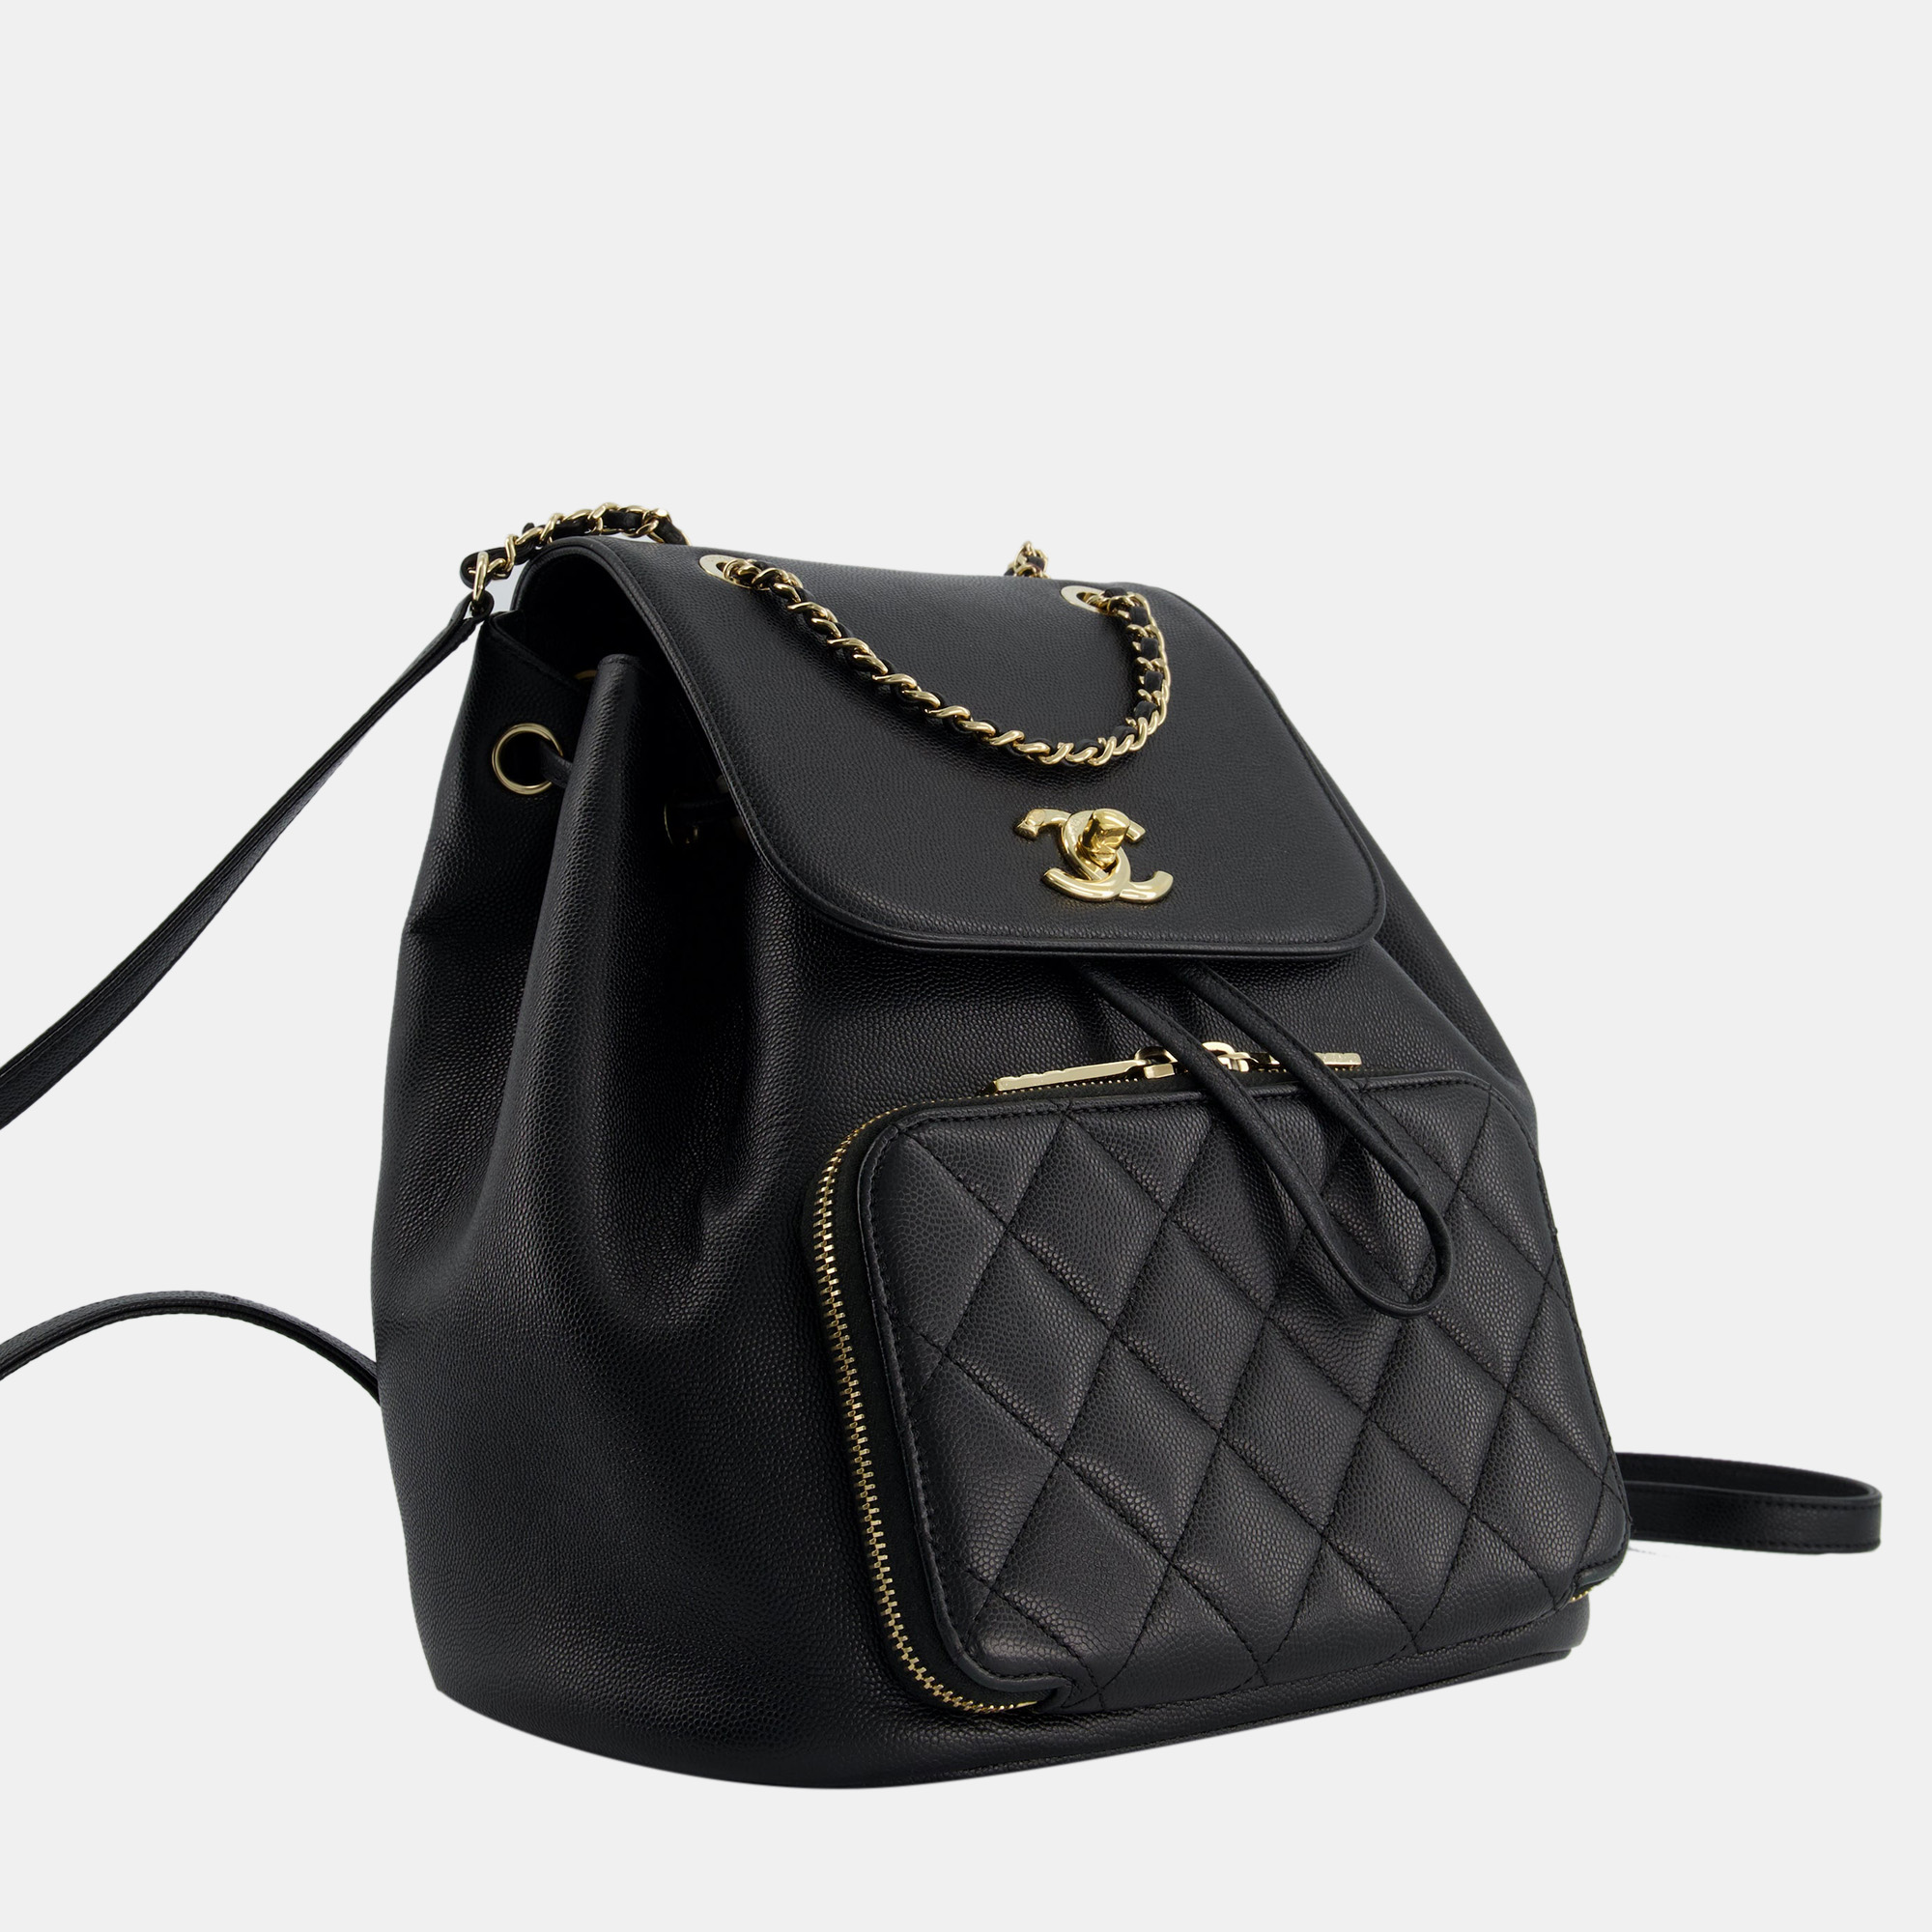 Chanel CC Black Caviar Leather Backpack Bag With Champagne Gold Hardware